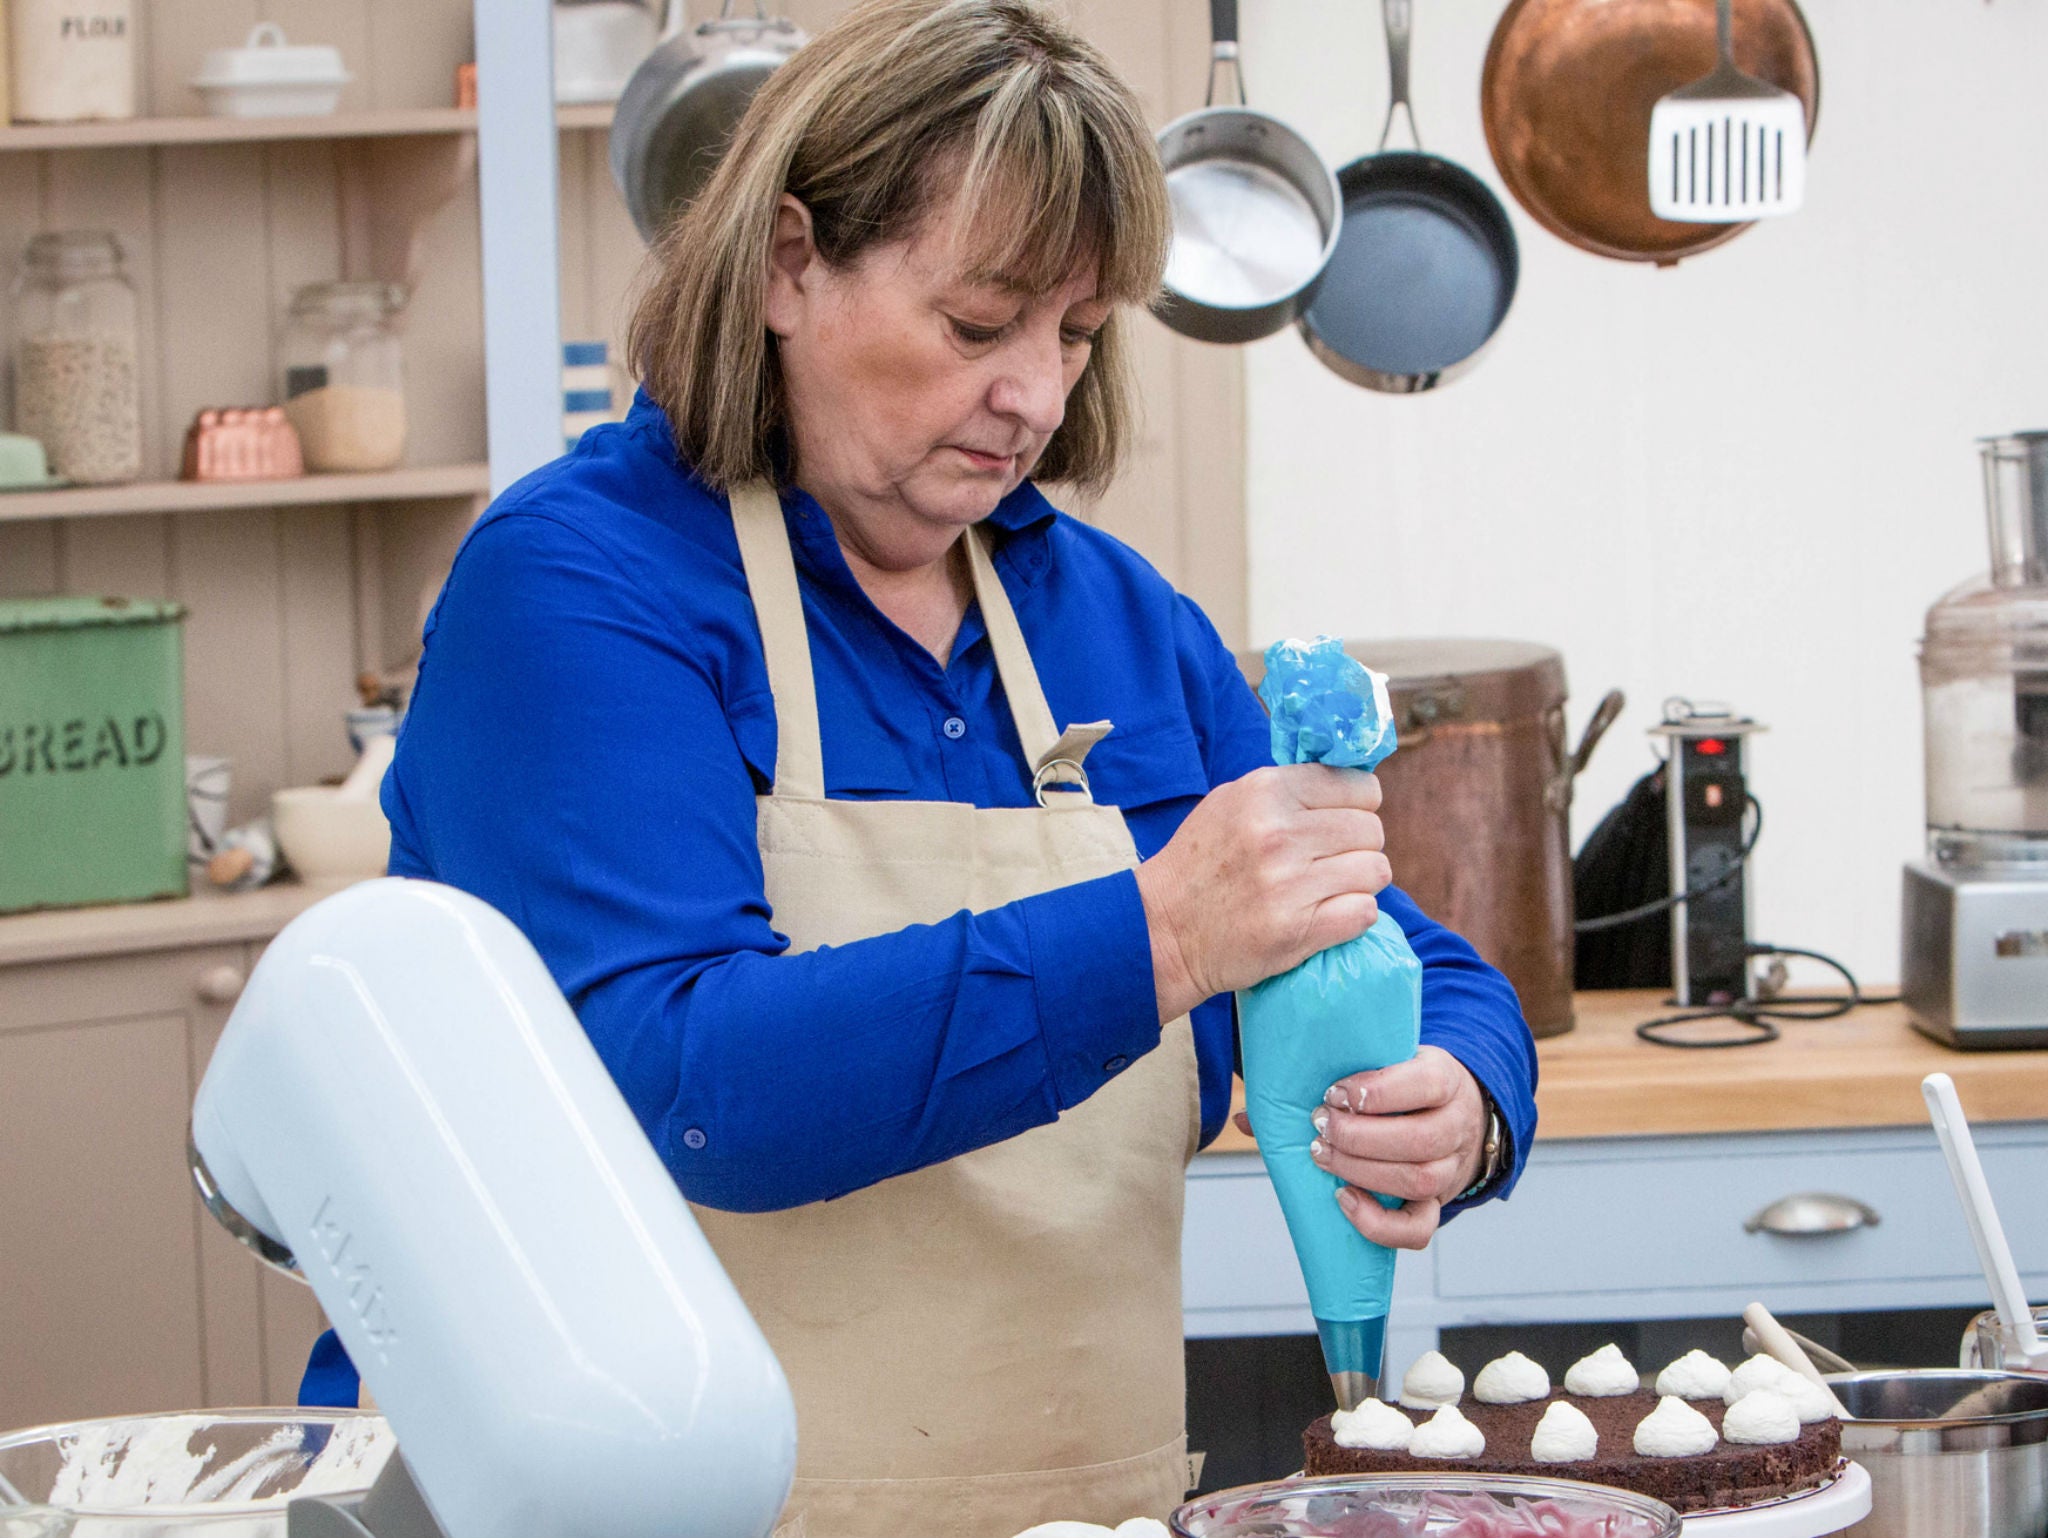 Marie Campbell was named star baker in the opening episode of The Great British Bake Off 2015